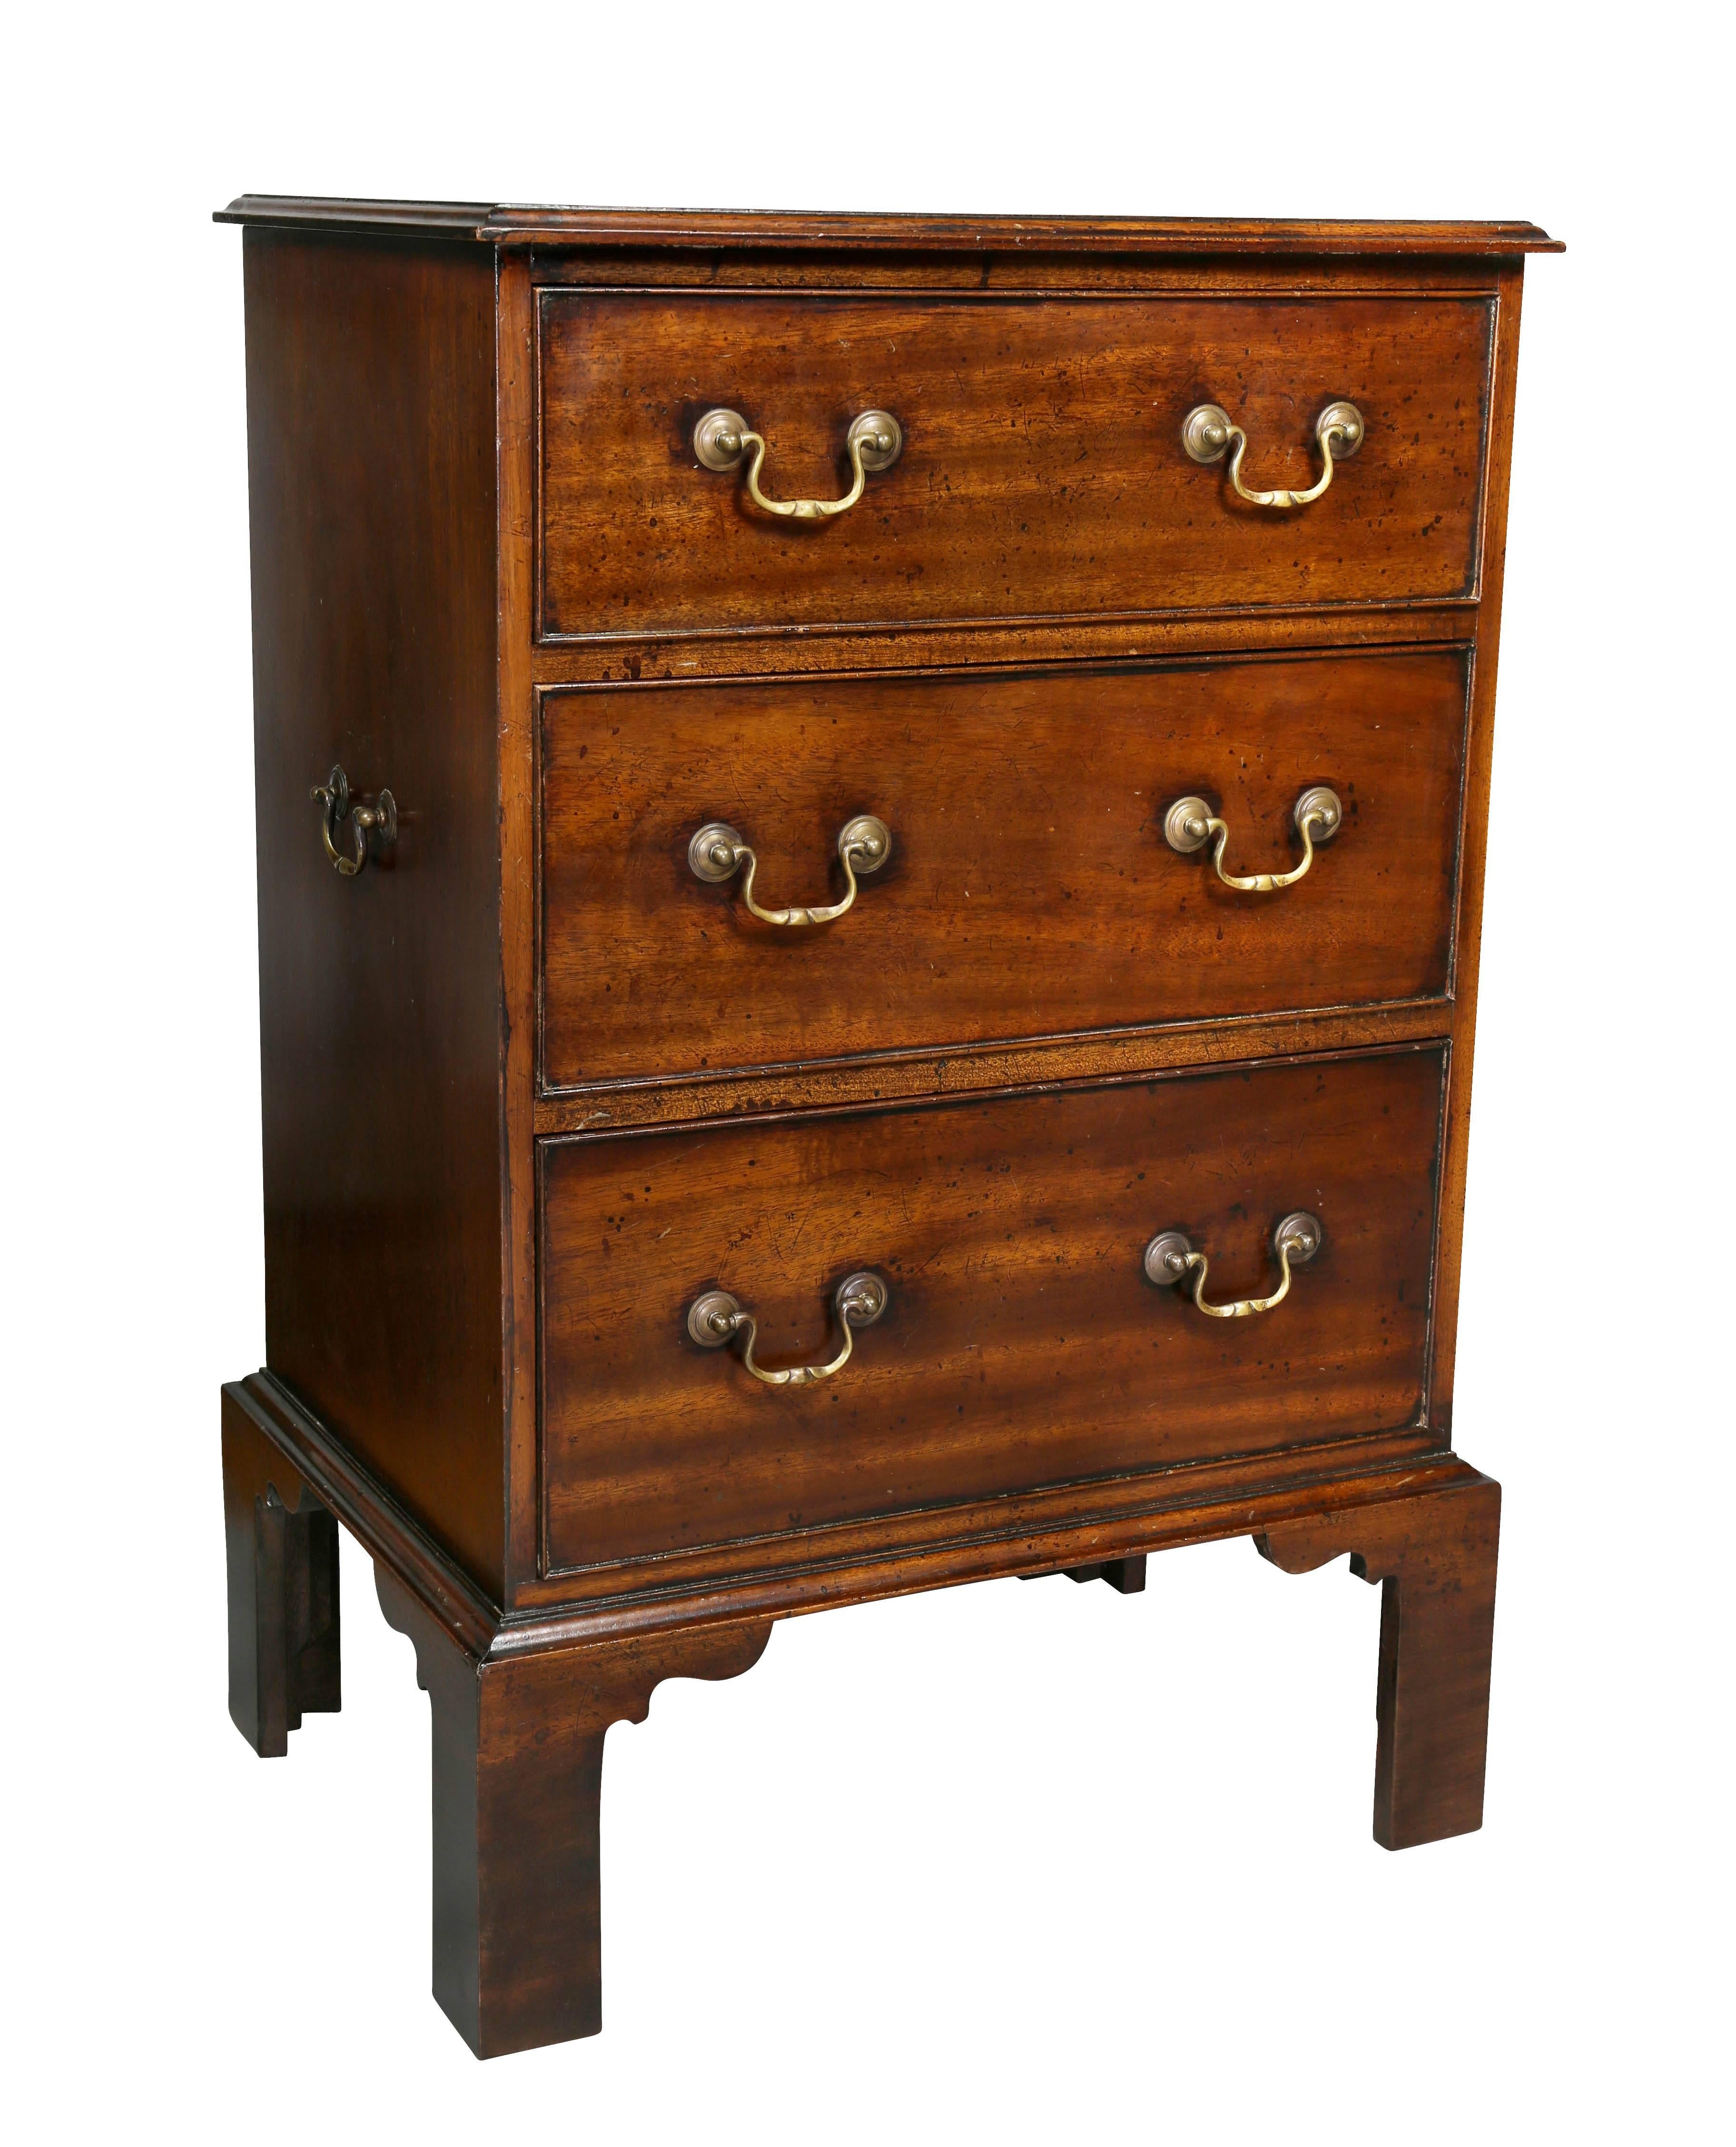 Each with rectangular tops with molded edge over three drawers ending on bracket feet. Handles on sides.